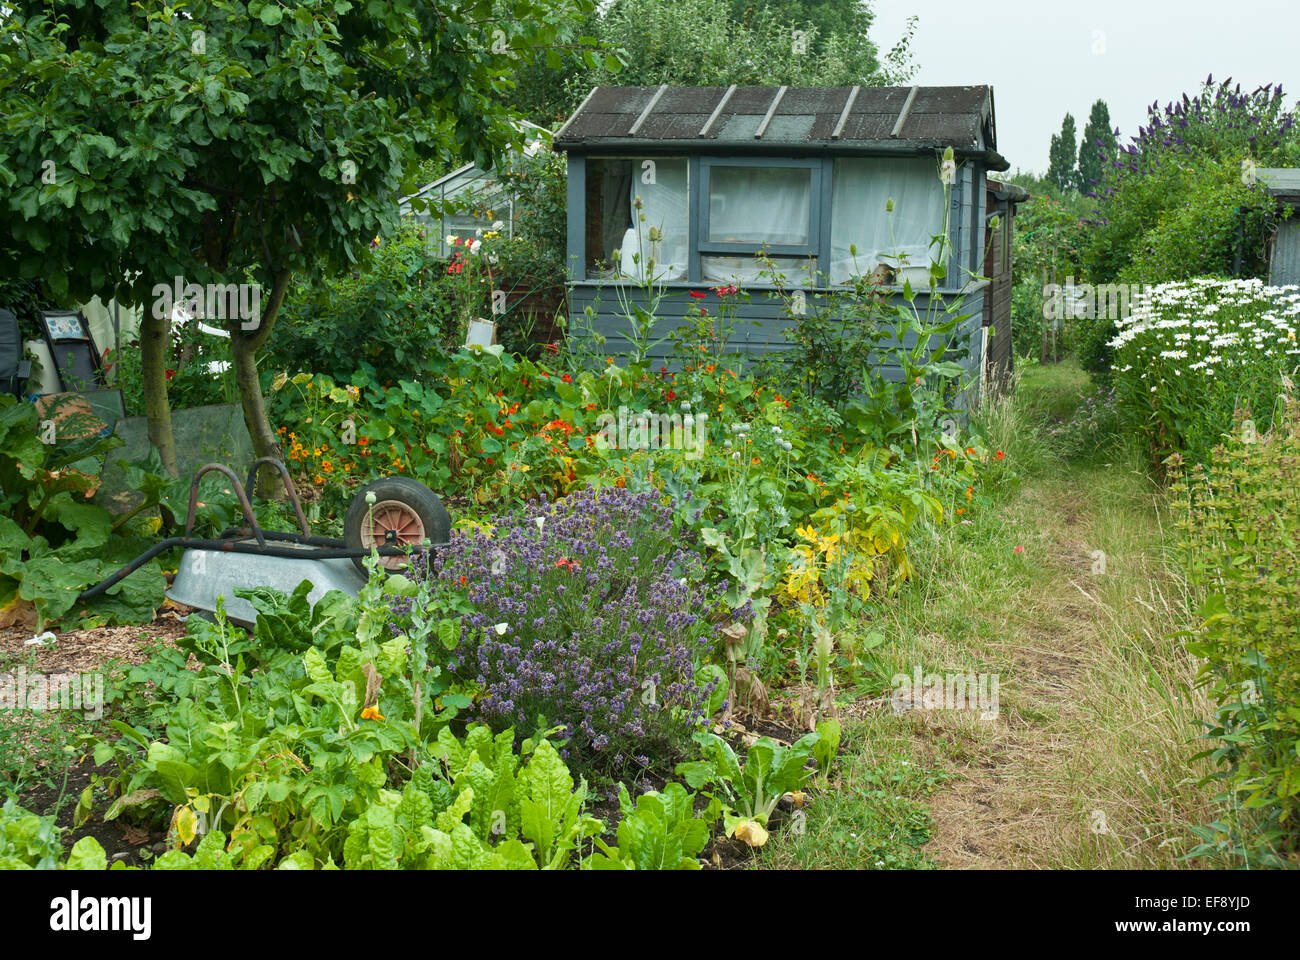 Attractive allotment in summer with shed, vegetables, fruit trees and flowers; chard, marigolds, nasturtiums, michaelmas daisies Stock Photo